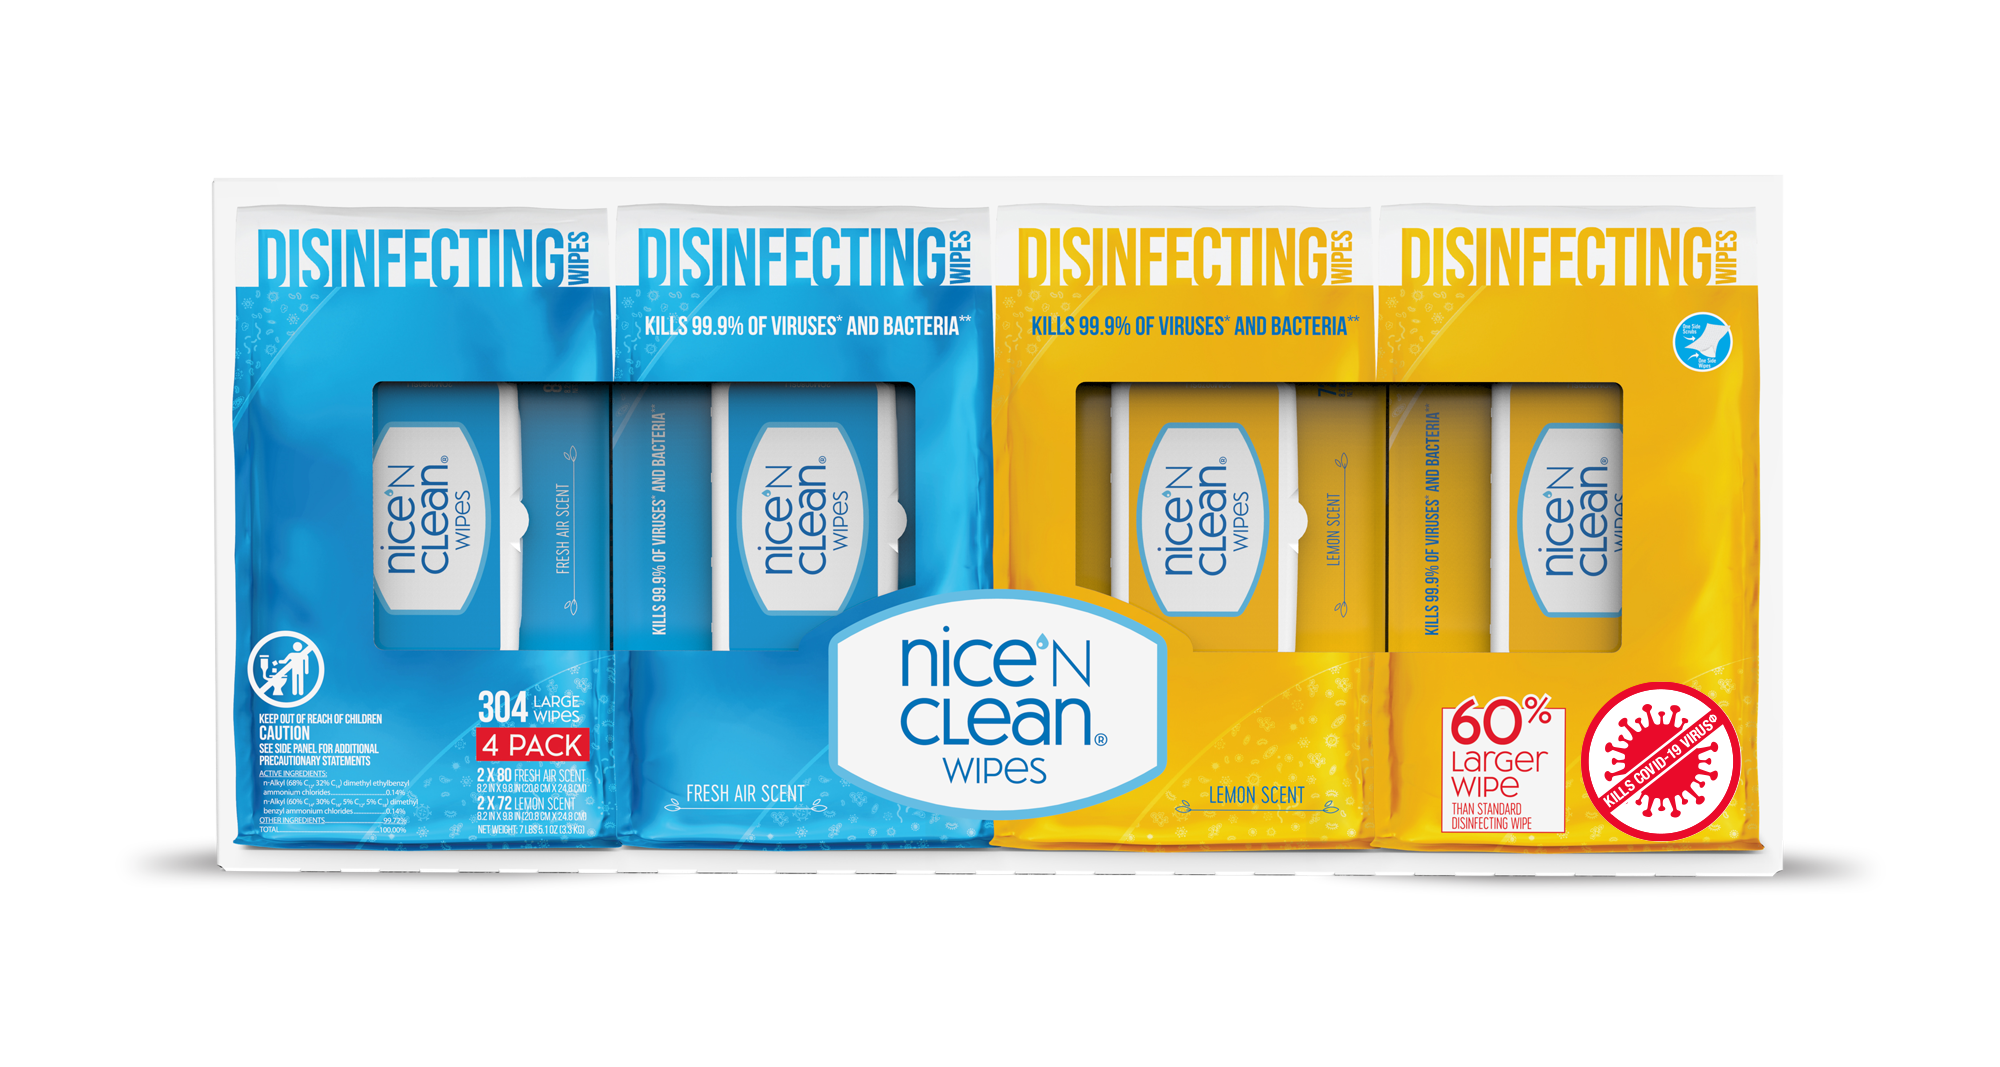 10679-NP_NNC_Wipes_Disinfecting-304ct-Frnt-wCovid.png